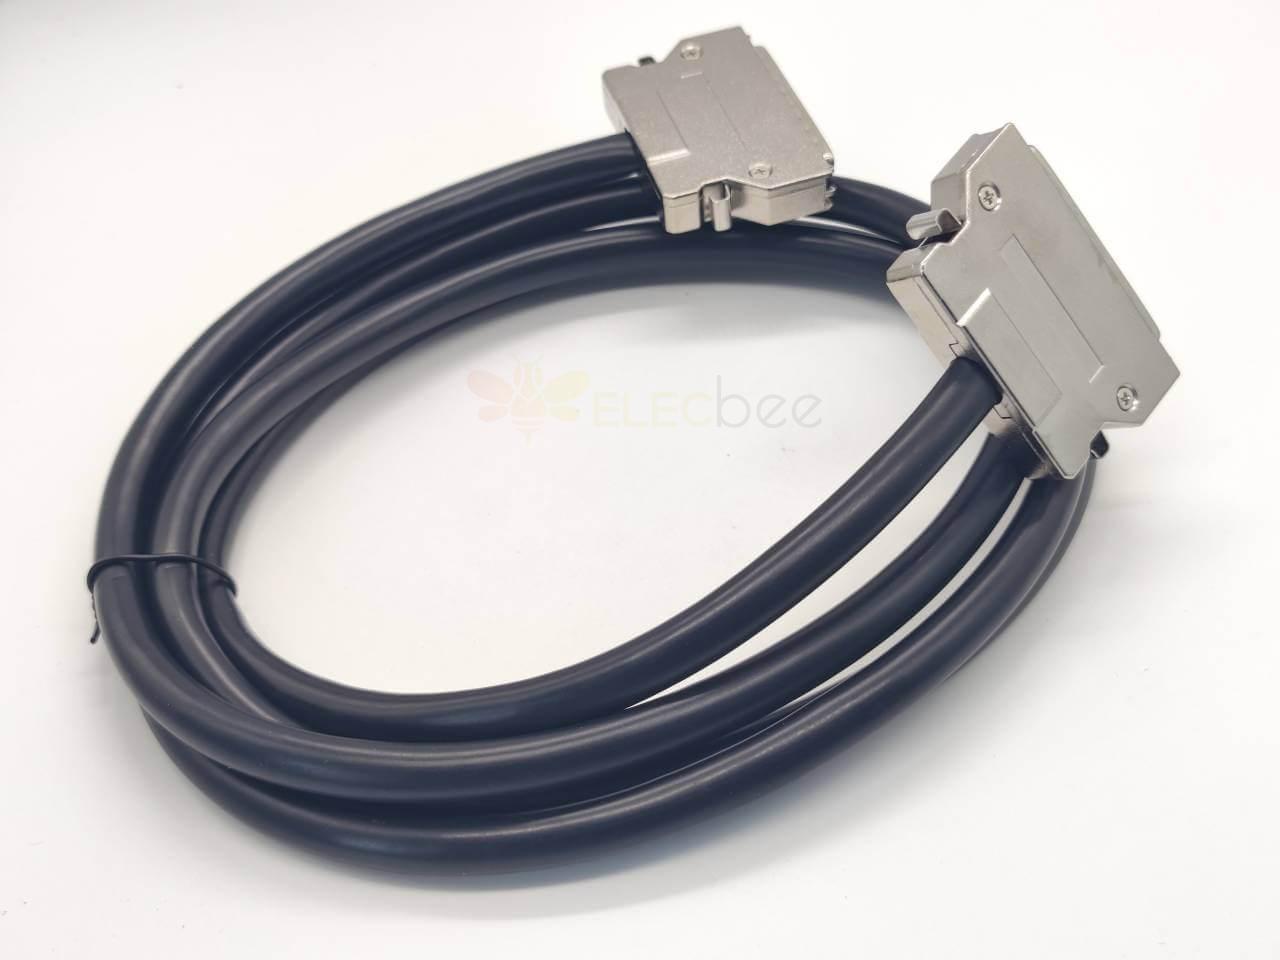 SCSI Connector 68Pin HPDB Male to HPDB 68 Pin Male Latch Lock Field Wireable Cable Cable 2M